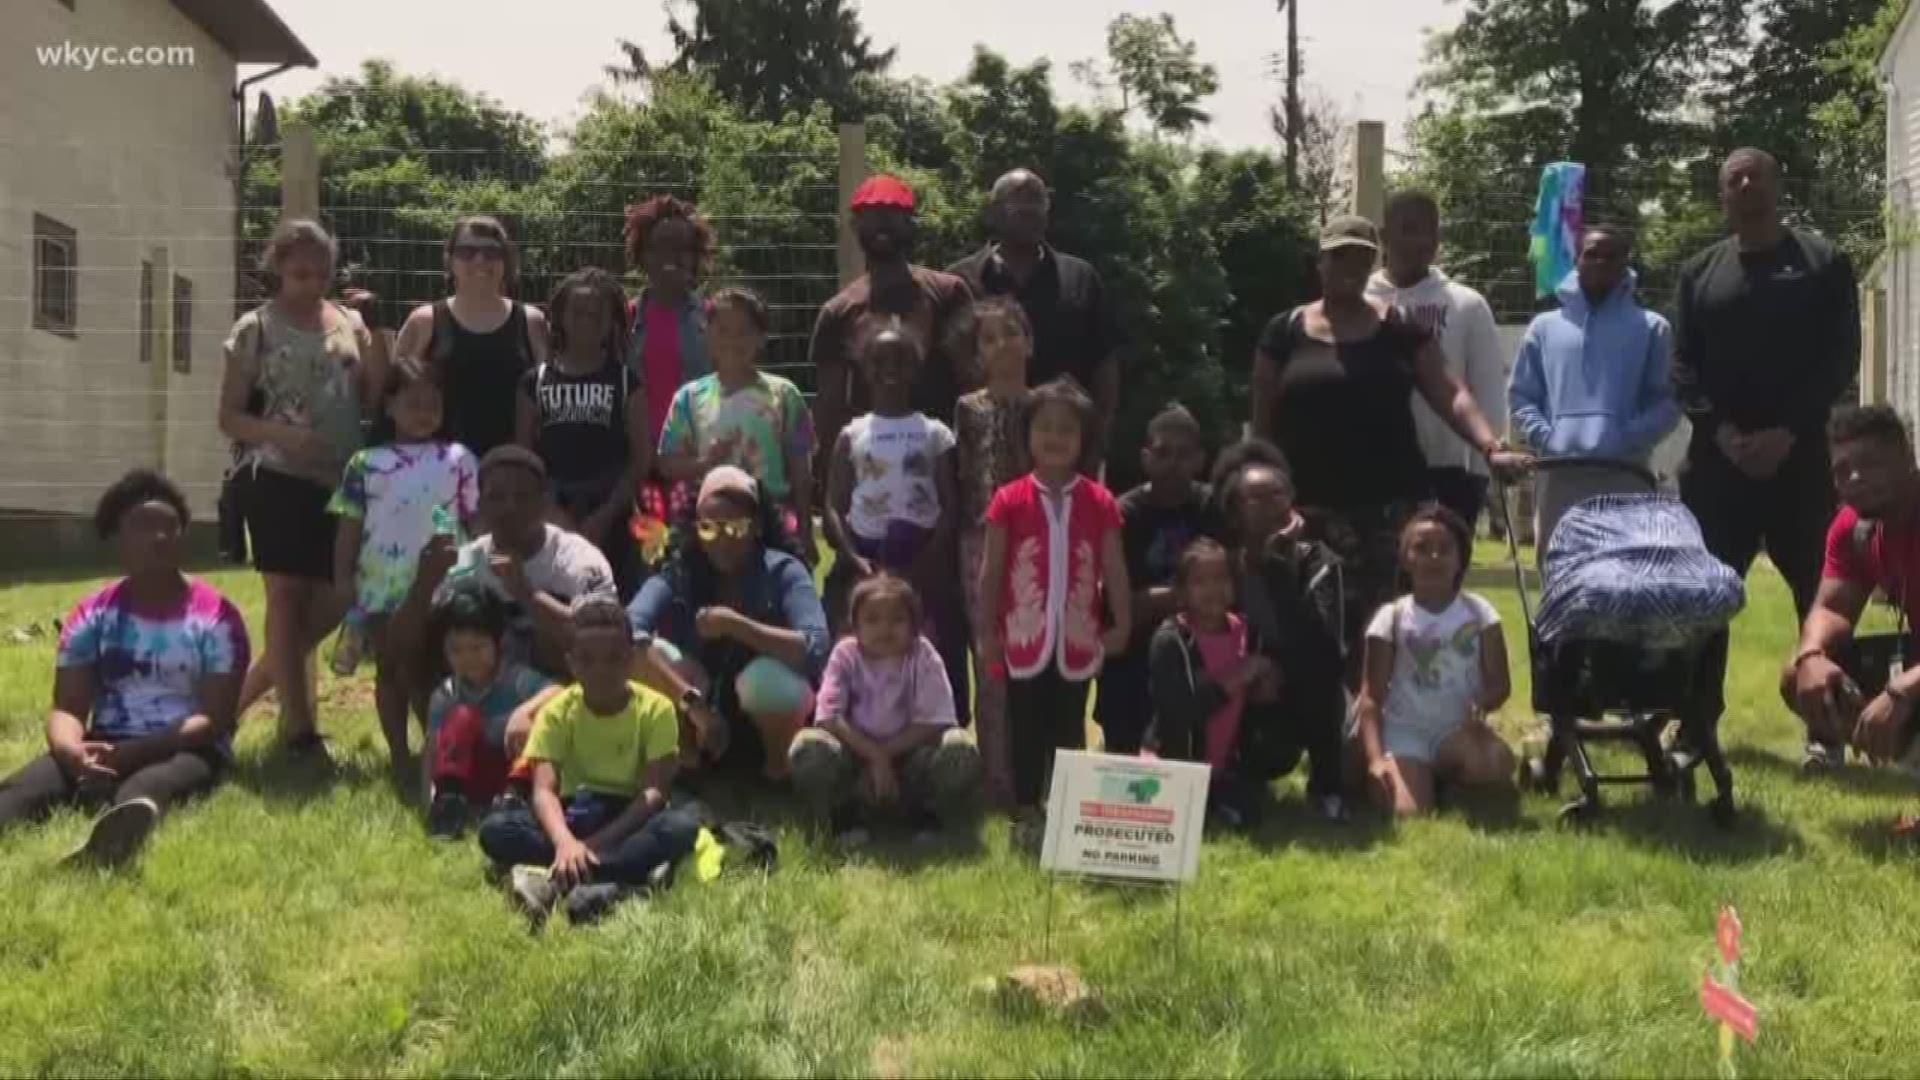 A community garden, inspired by an immigrant community in the Cleveland Heights neighborhood, was vandalized last week. Organizers spent two months building it and planting the garden, but in one day organizers say someone pulled all the plants from its roots.